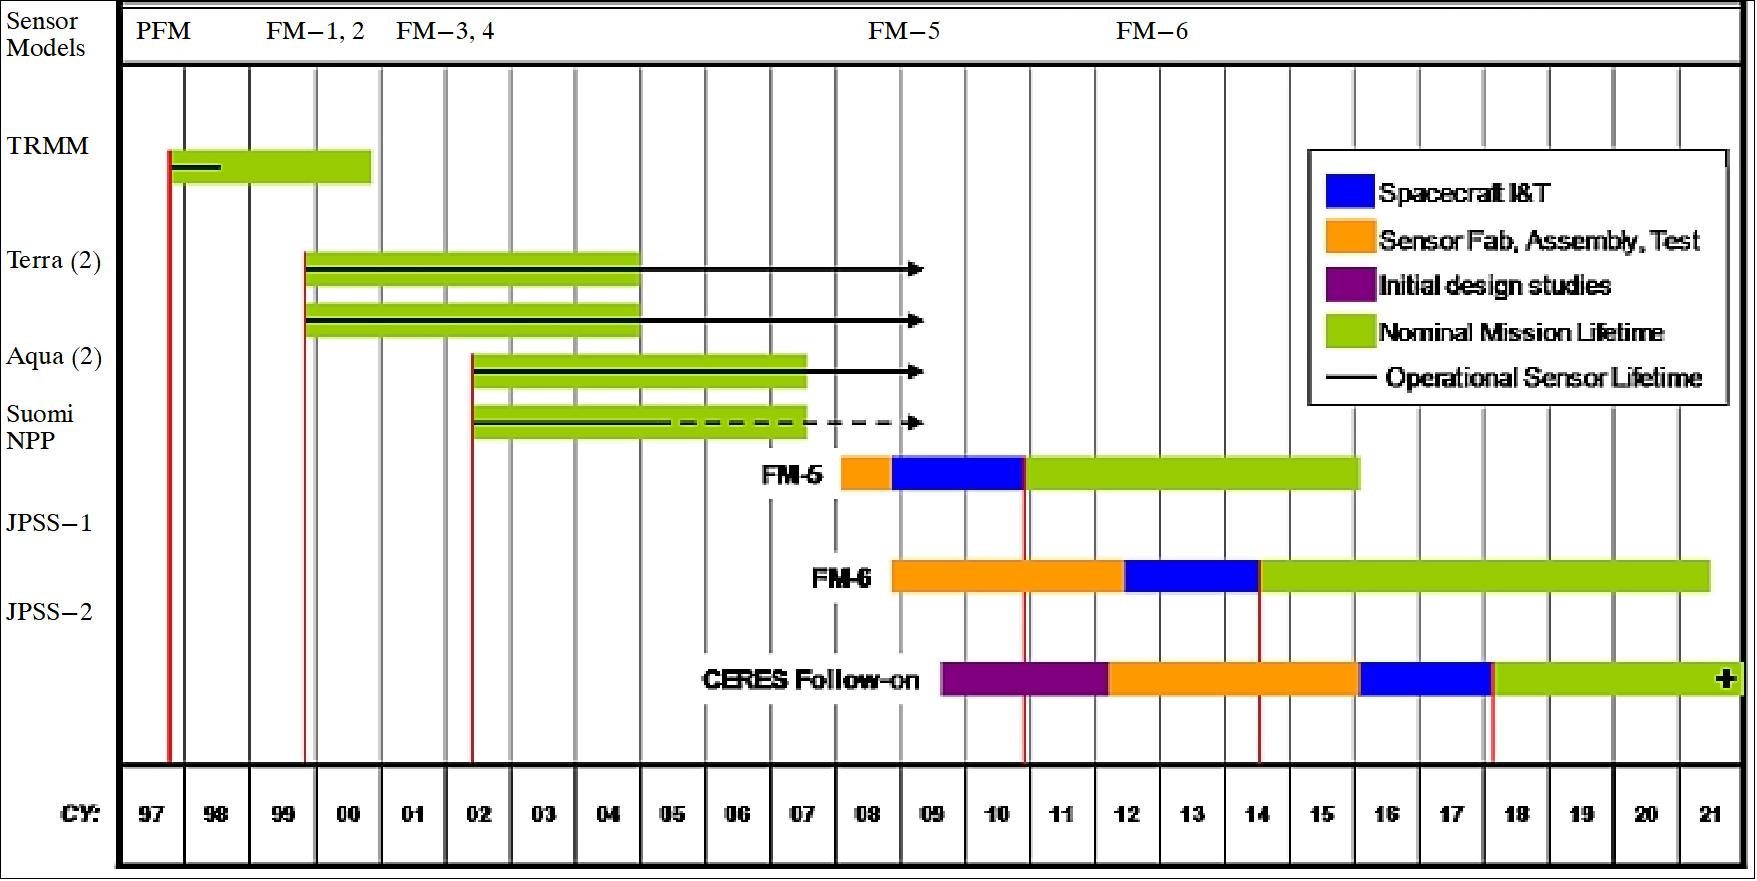 Figure 58: Overview of past, current and future missions with corresponding CERES instrument FM generations (image credit: NASA/LaRC) 91)